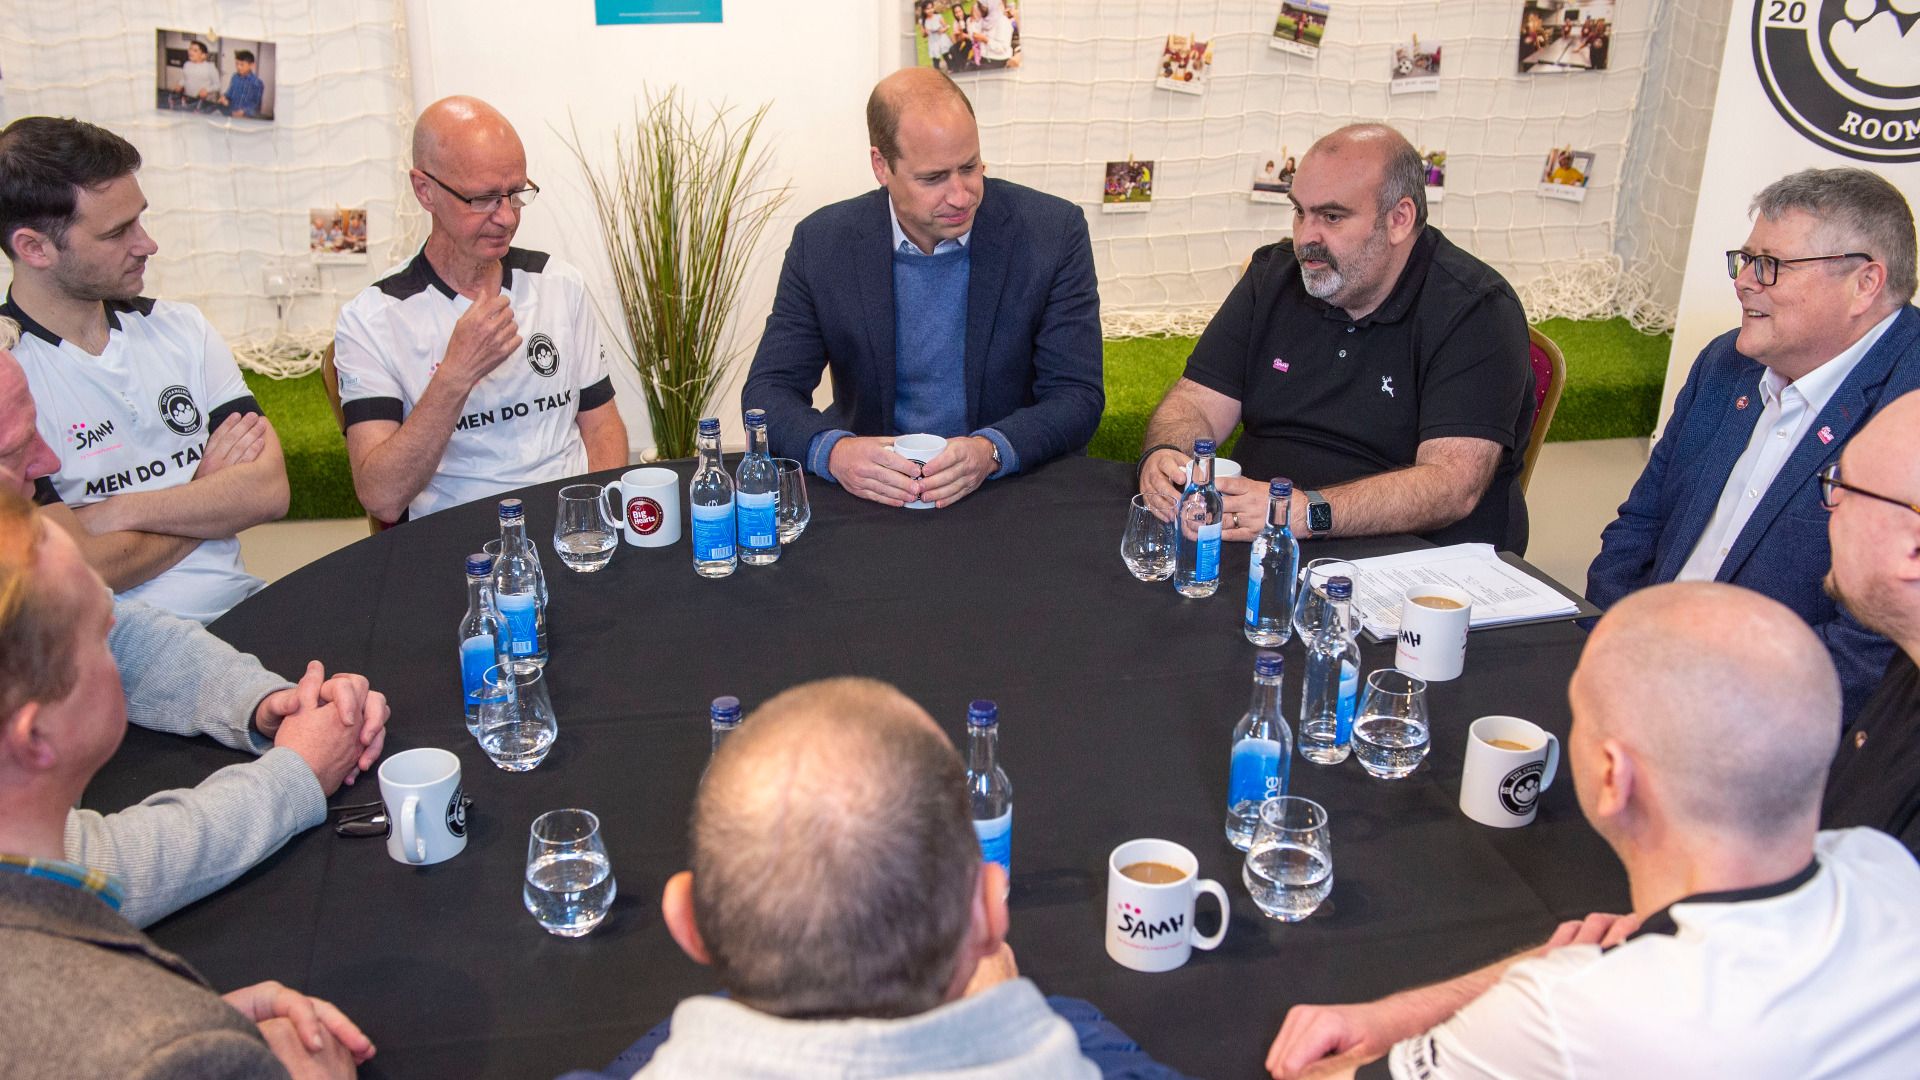 Duke of Cambridge sat round table with group of men